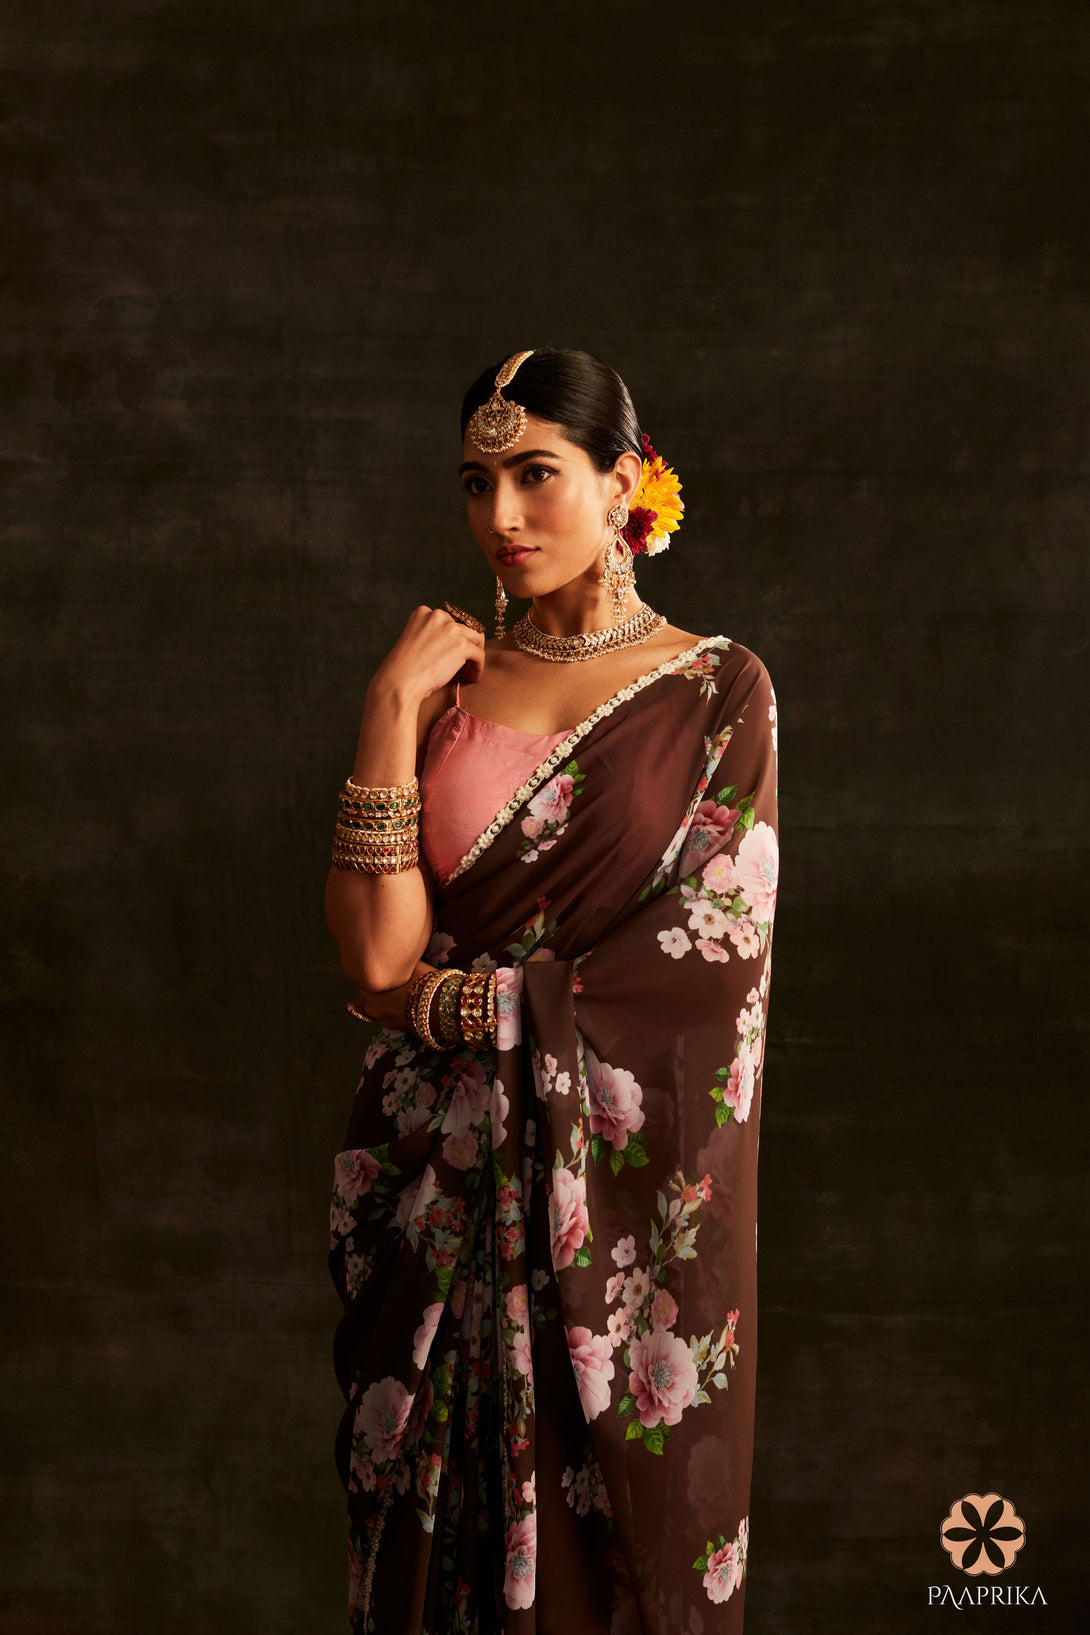 Close-up of the intricate floral print on the Trendy Brown Georgette Saree. The rich brown color and detailed floral pattern add a touch of sophistication and natural beauty to the georgette fabric.